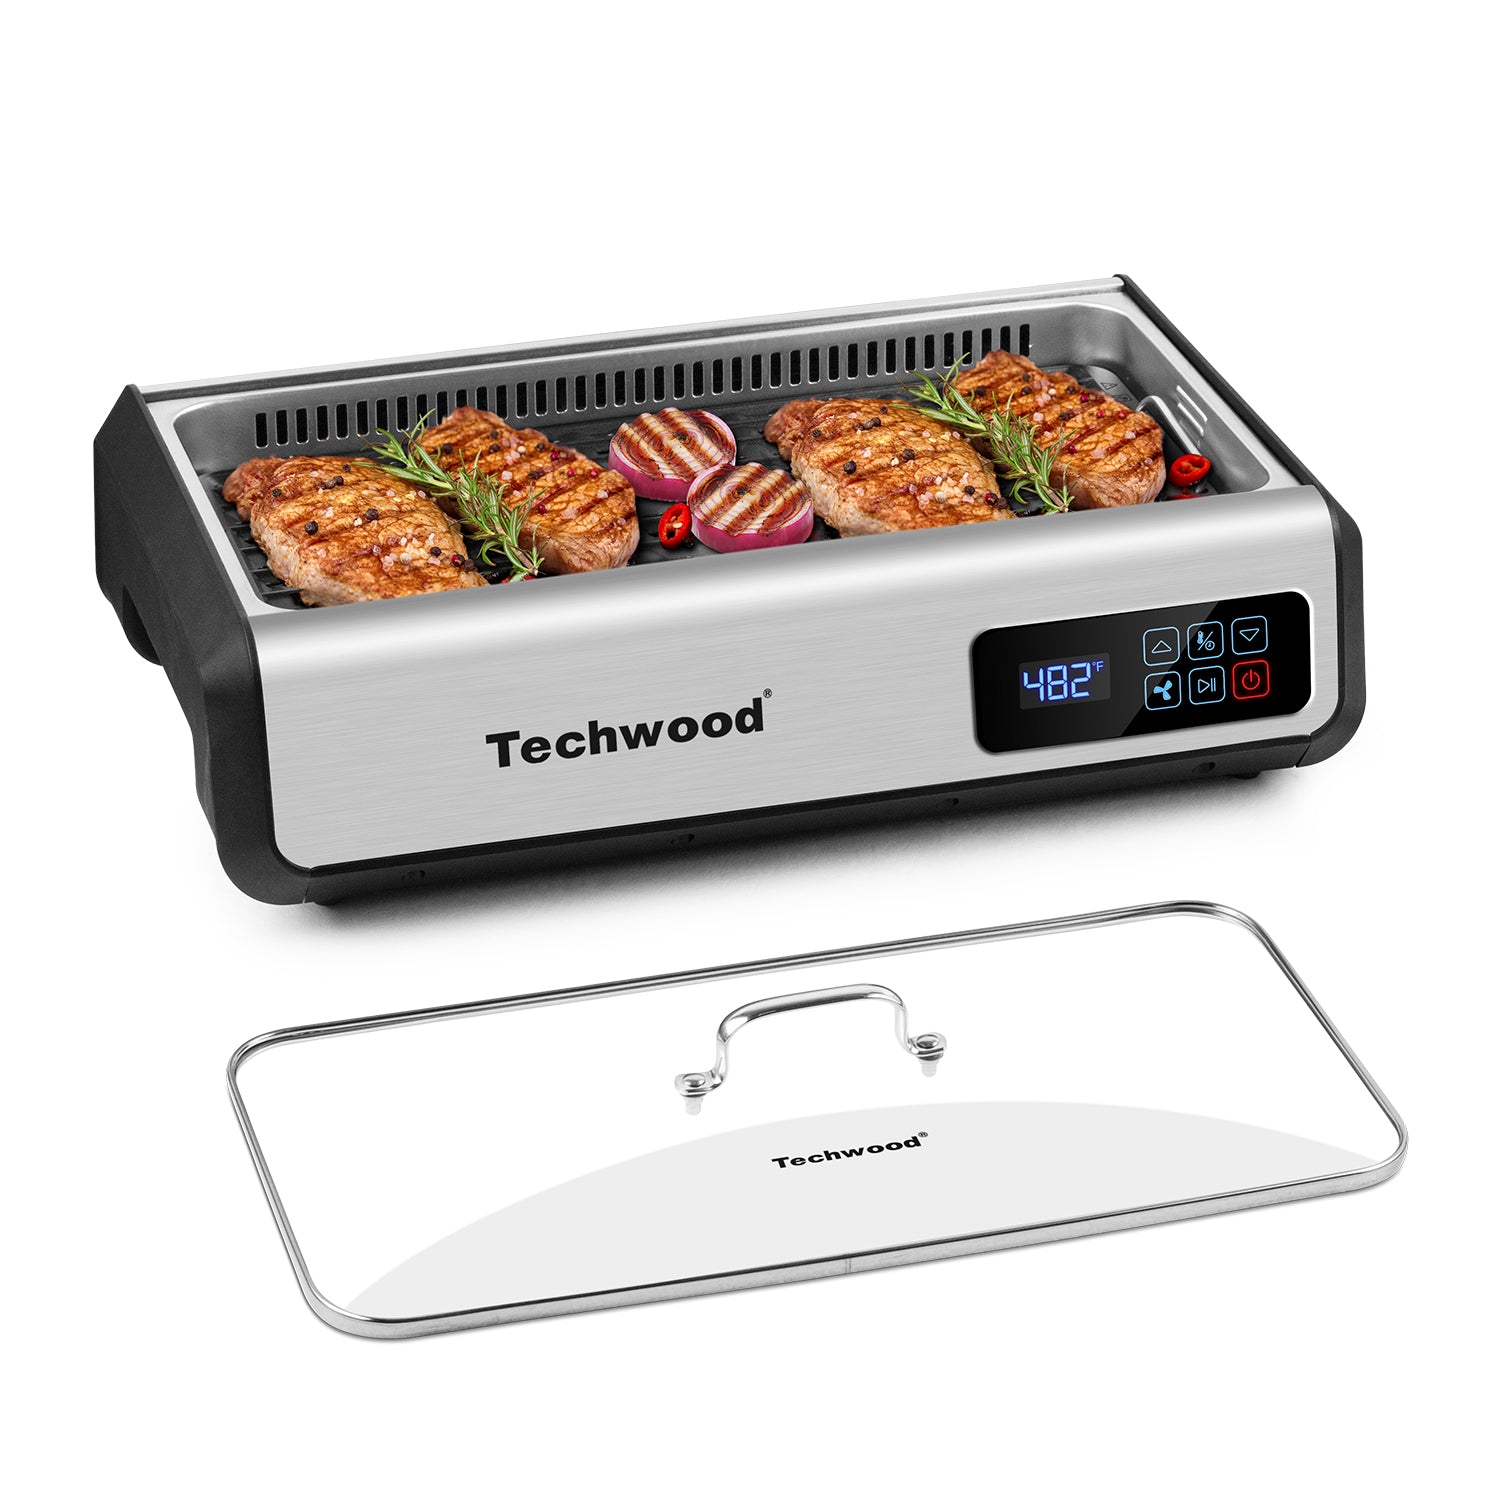 Techwood 1600W Indoor Outdoor Electric grill, Electric BBQ Grill